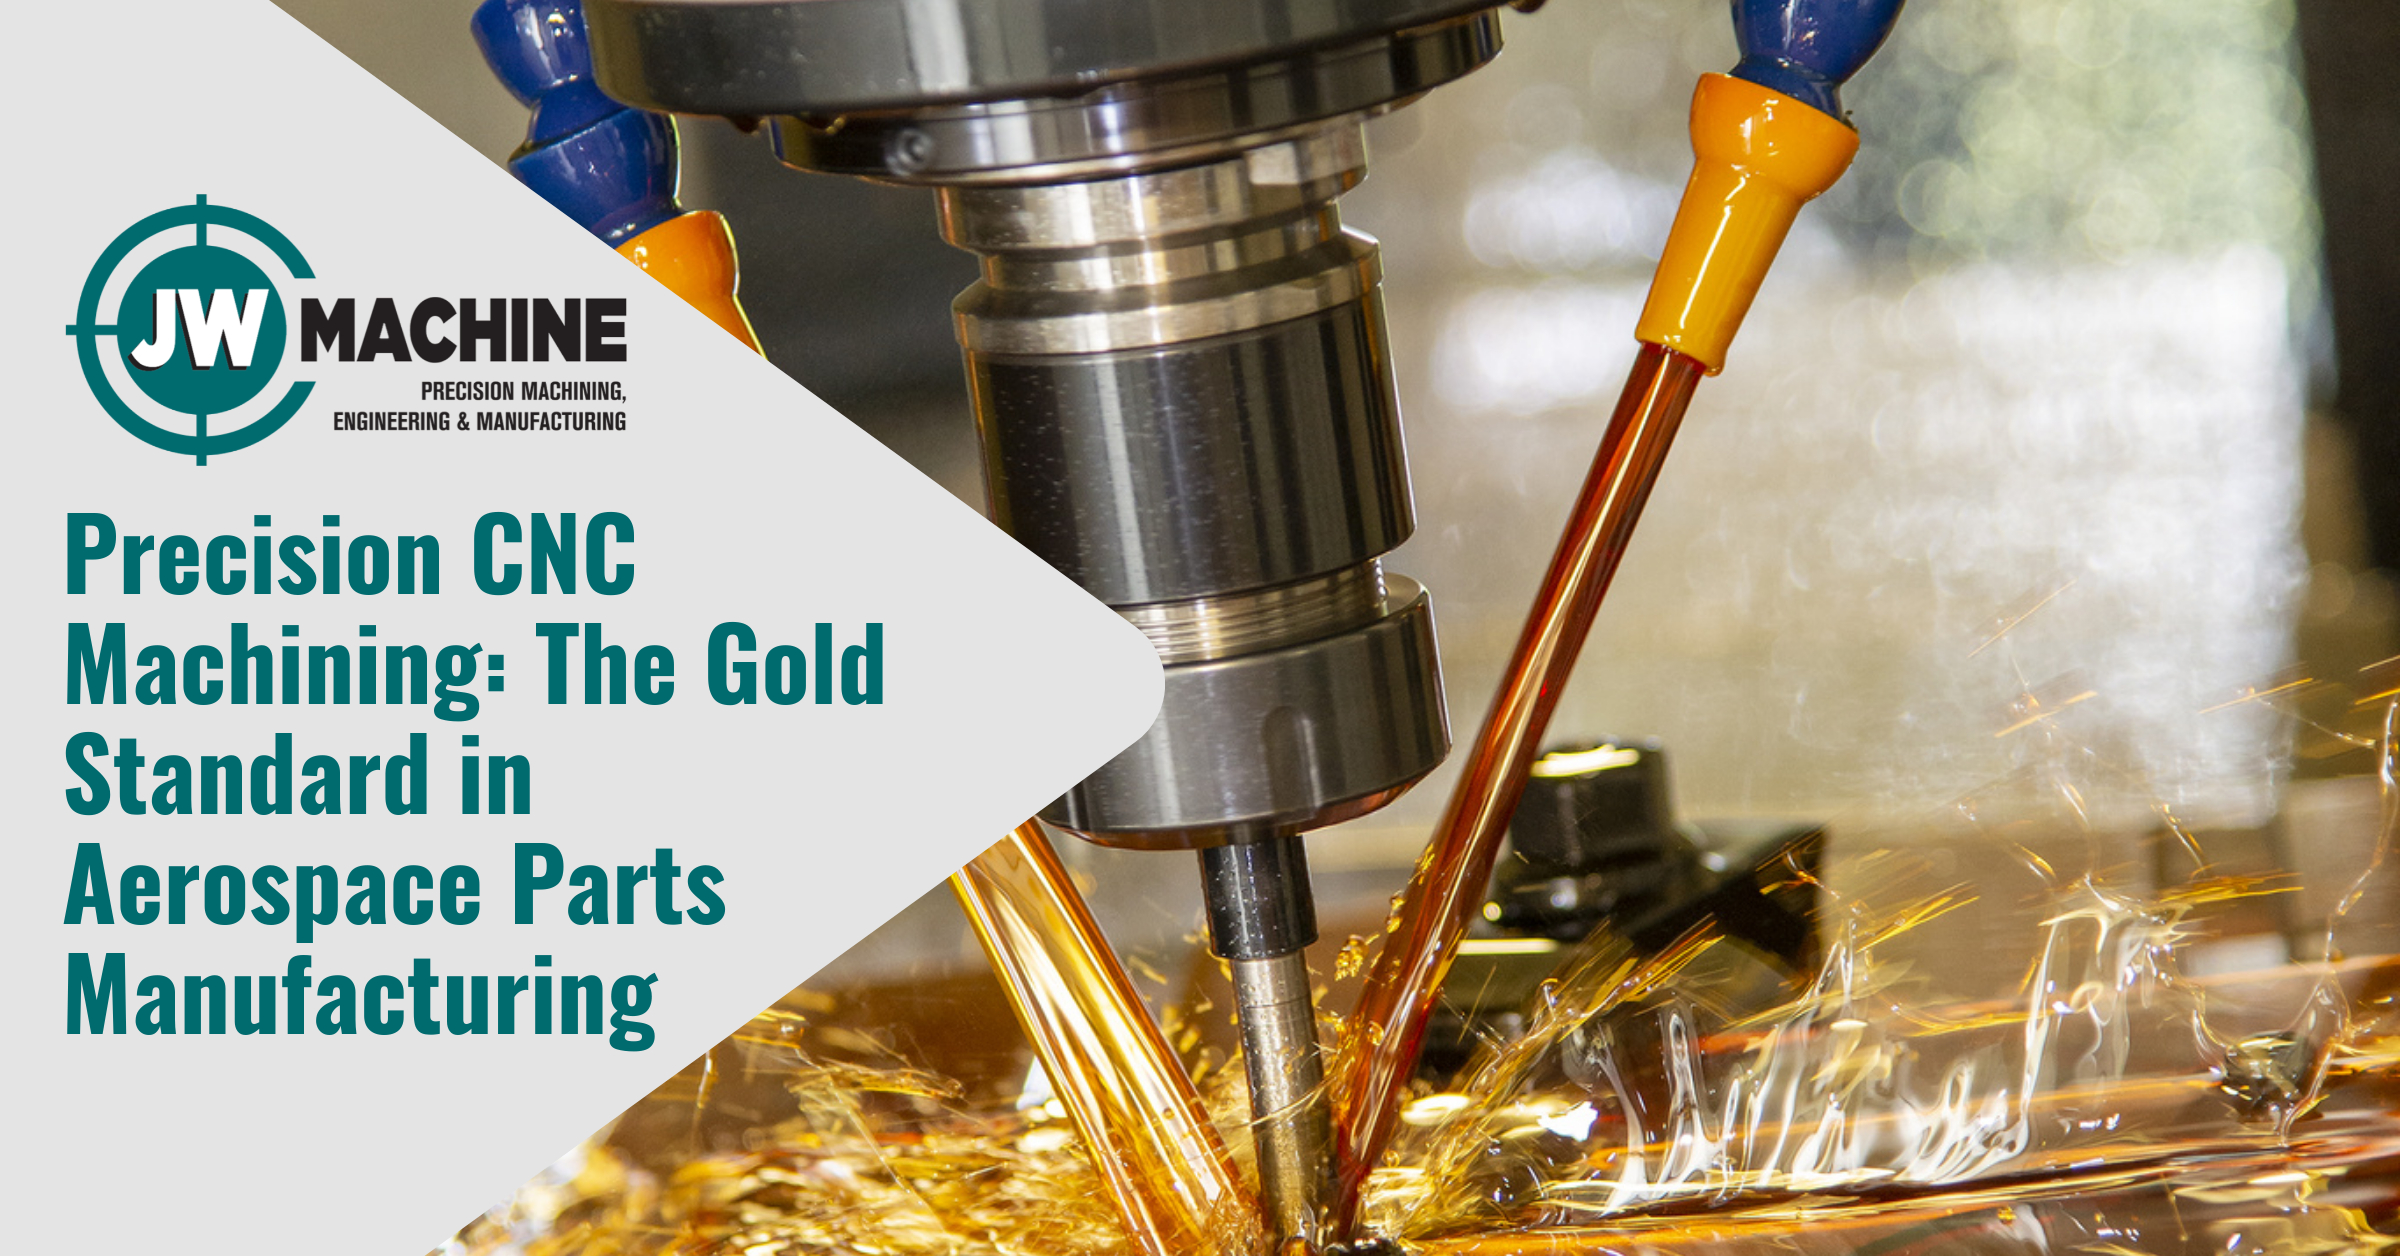 The Gold Standard in Aerospace Parts Manufacturing